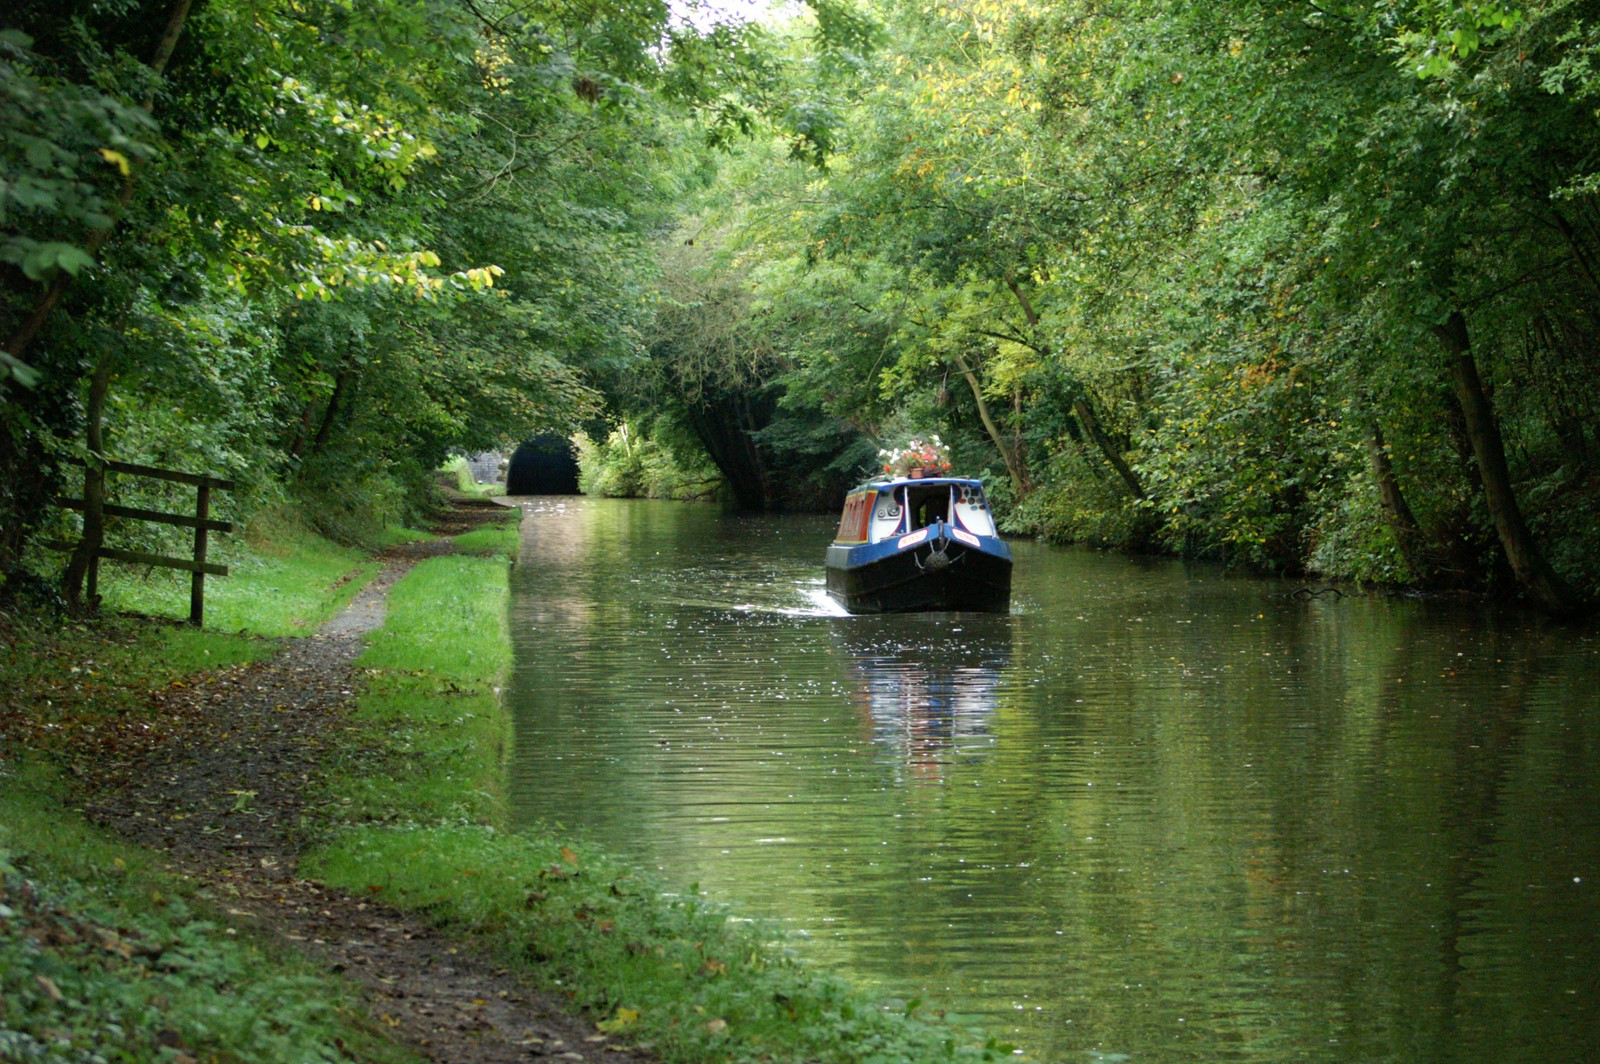 Leaving the Braunston Tunnel, Daventry, Northamptonshire